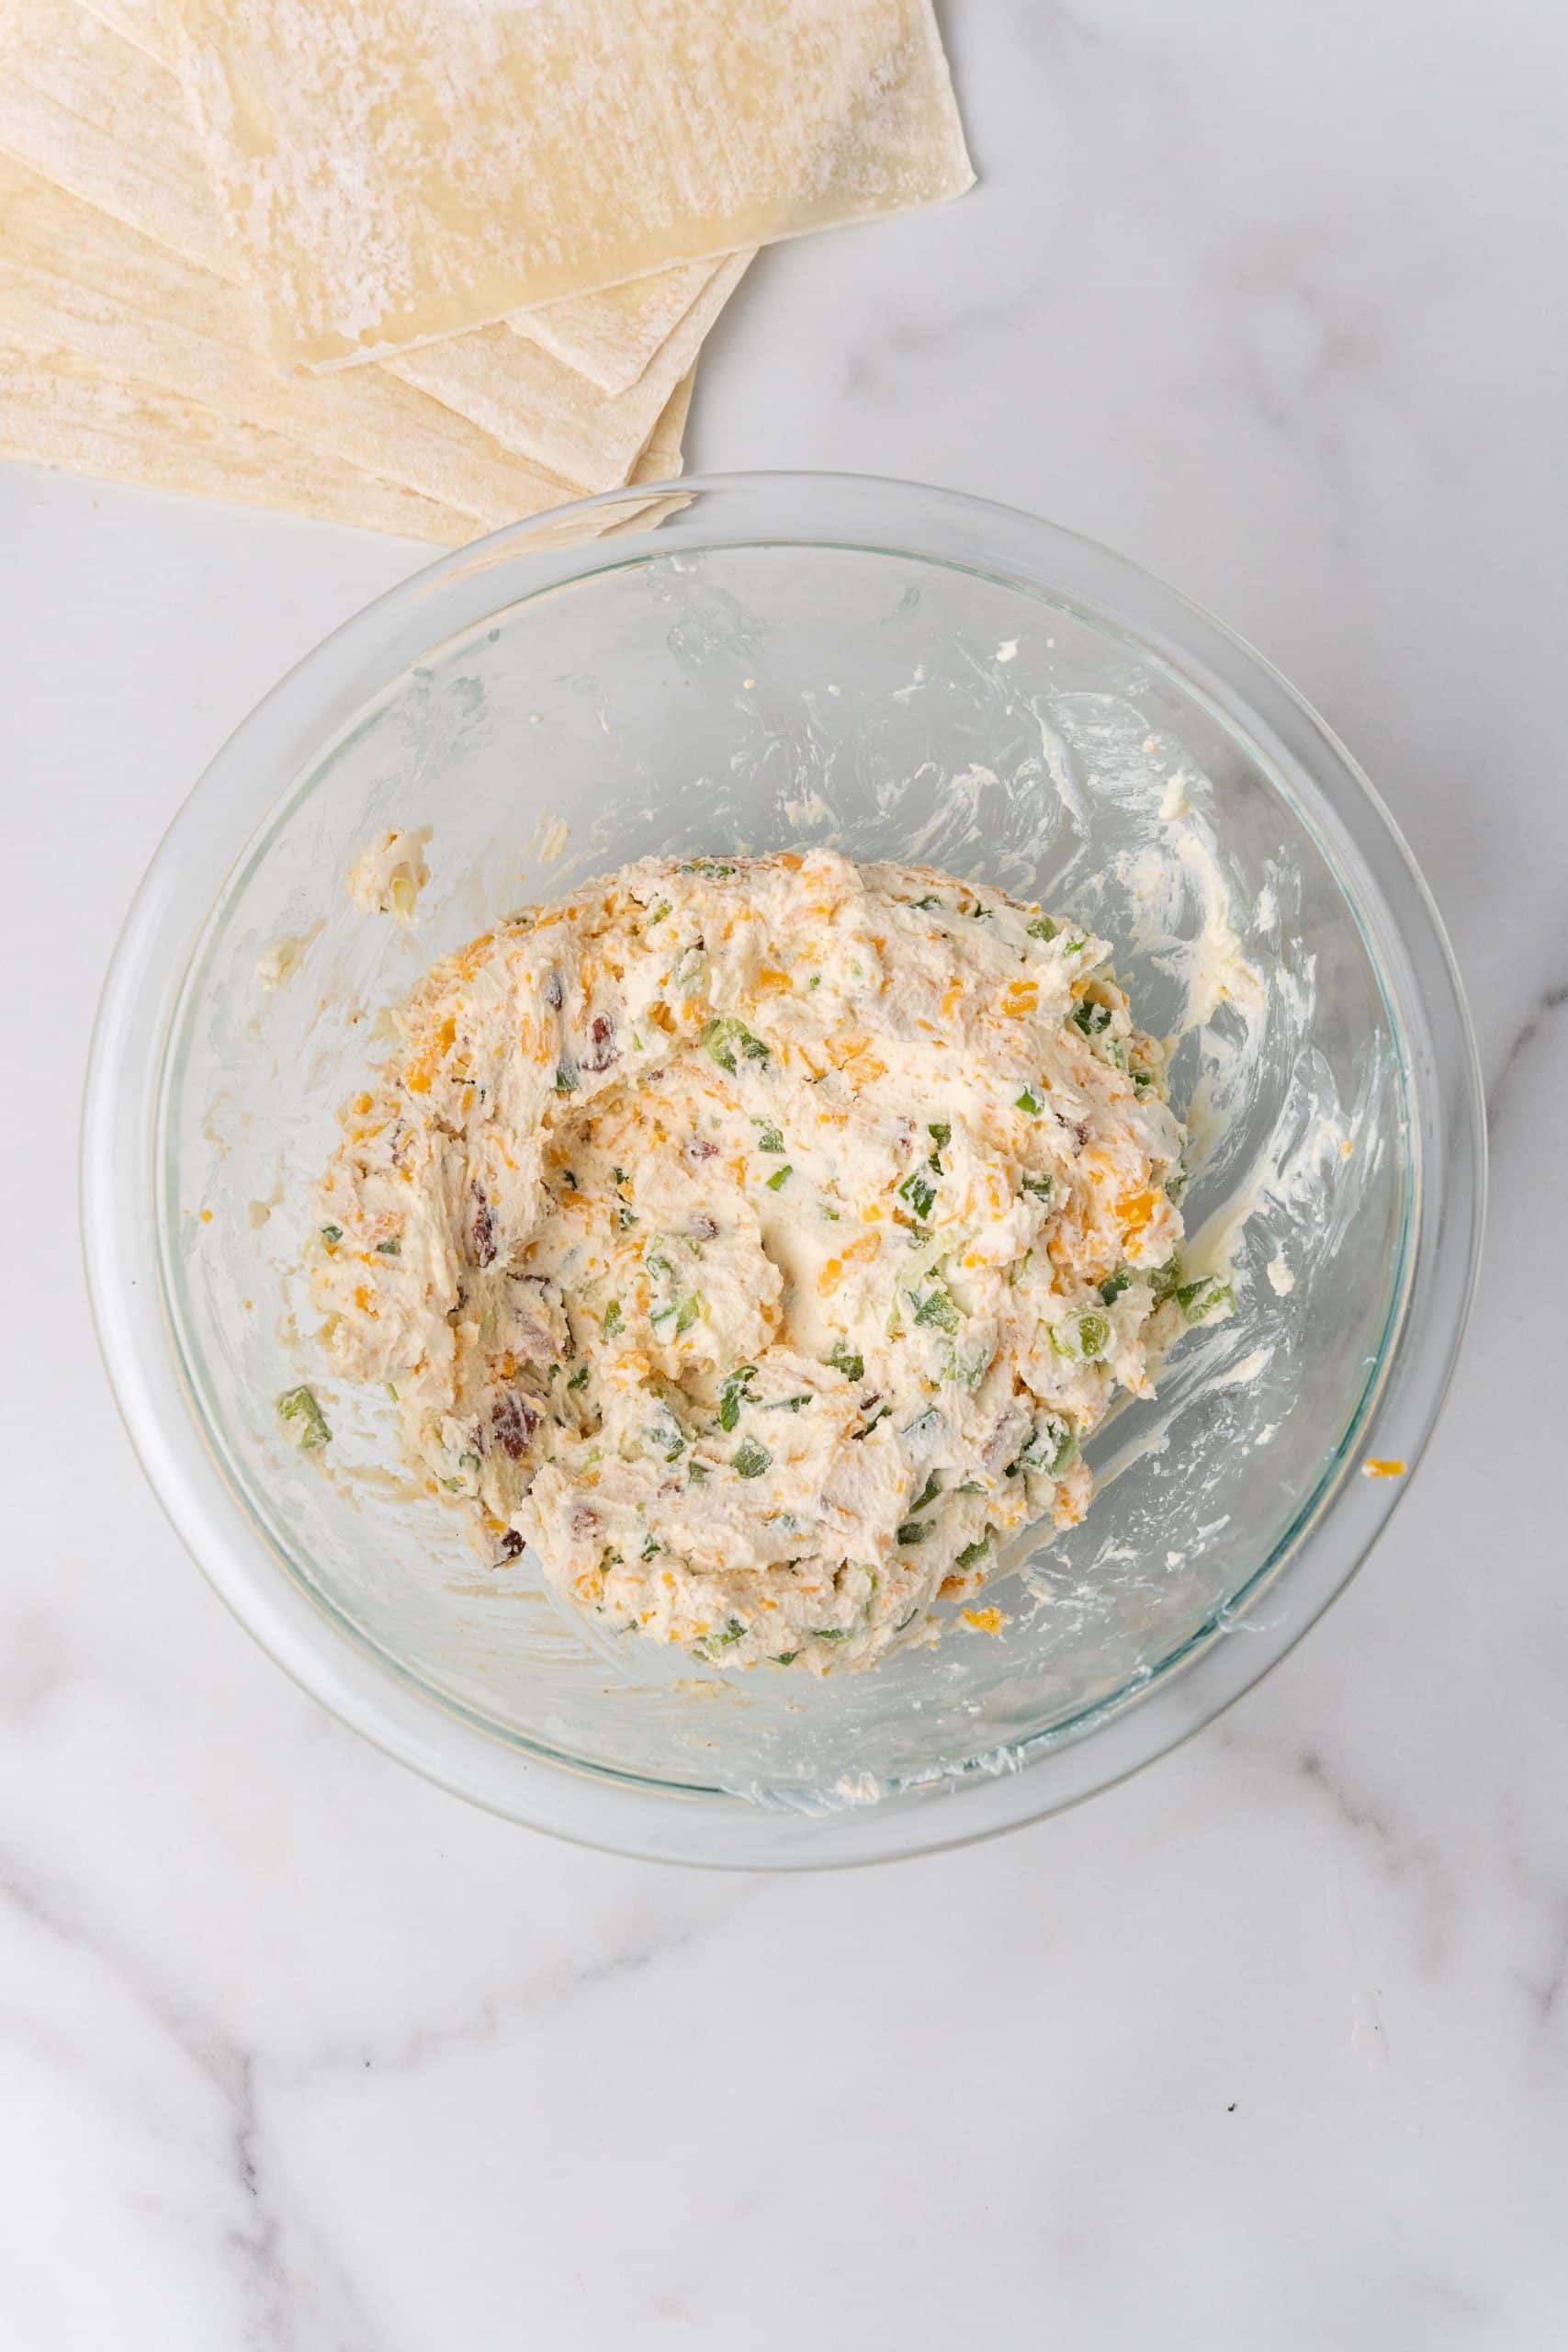 jalapeno popper cream cheese filling in a small glass mixing bowl